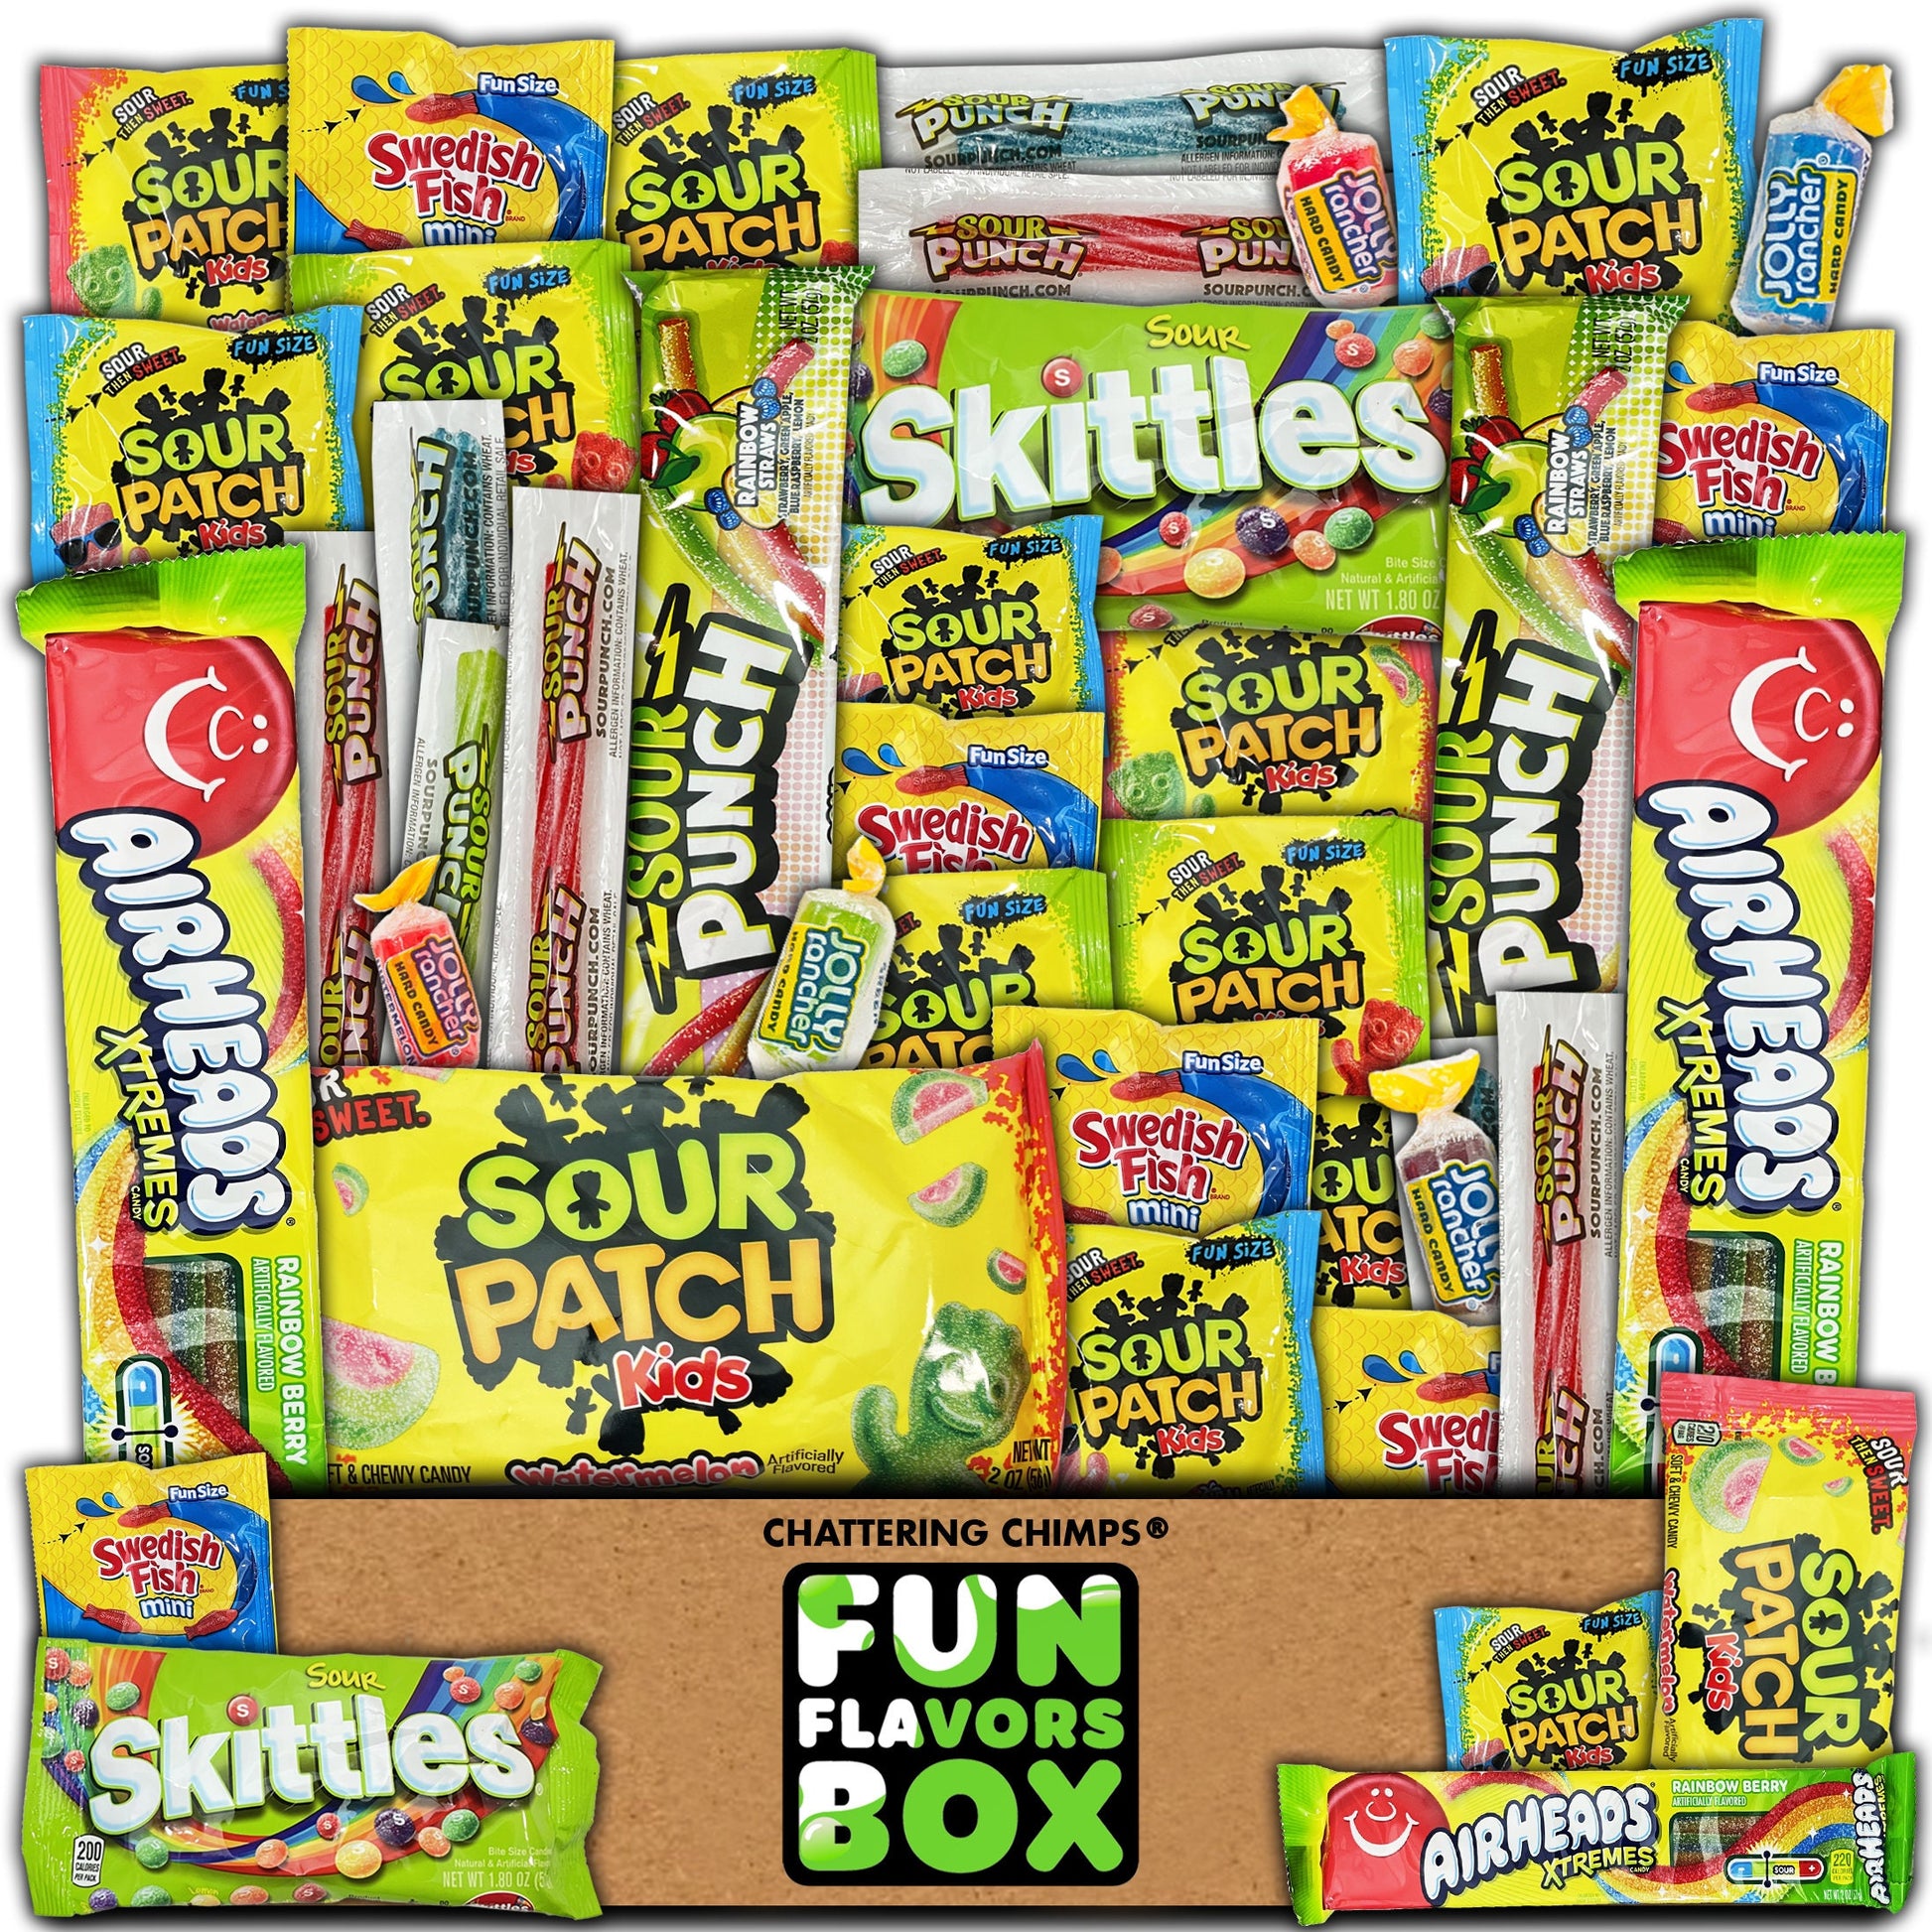 Fun Flavors Box Premium Sweet and Sour Candy Candy Snack Gift Box